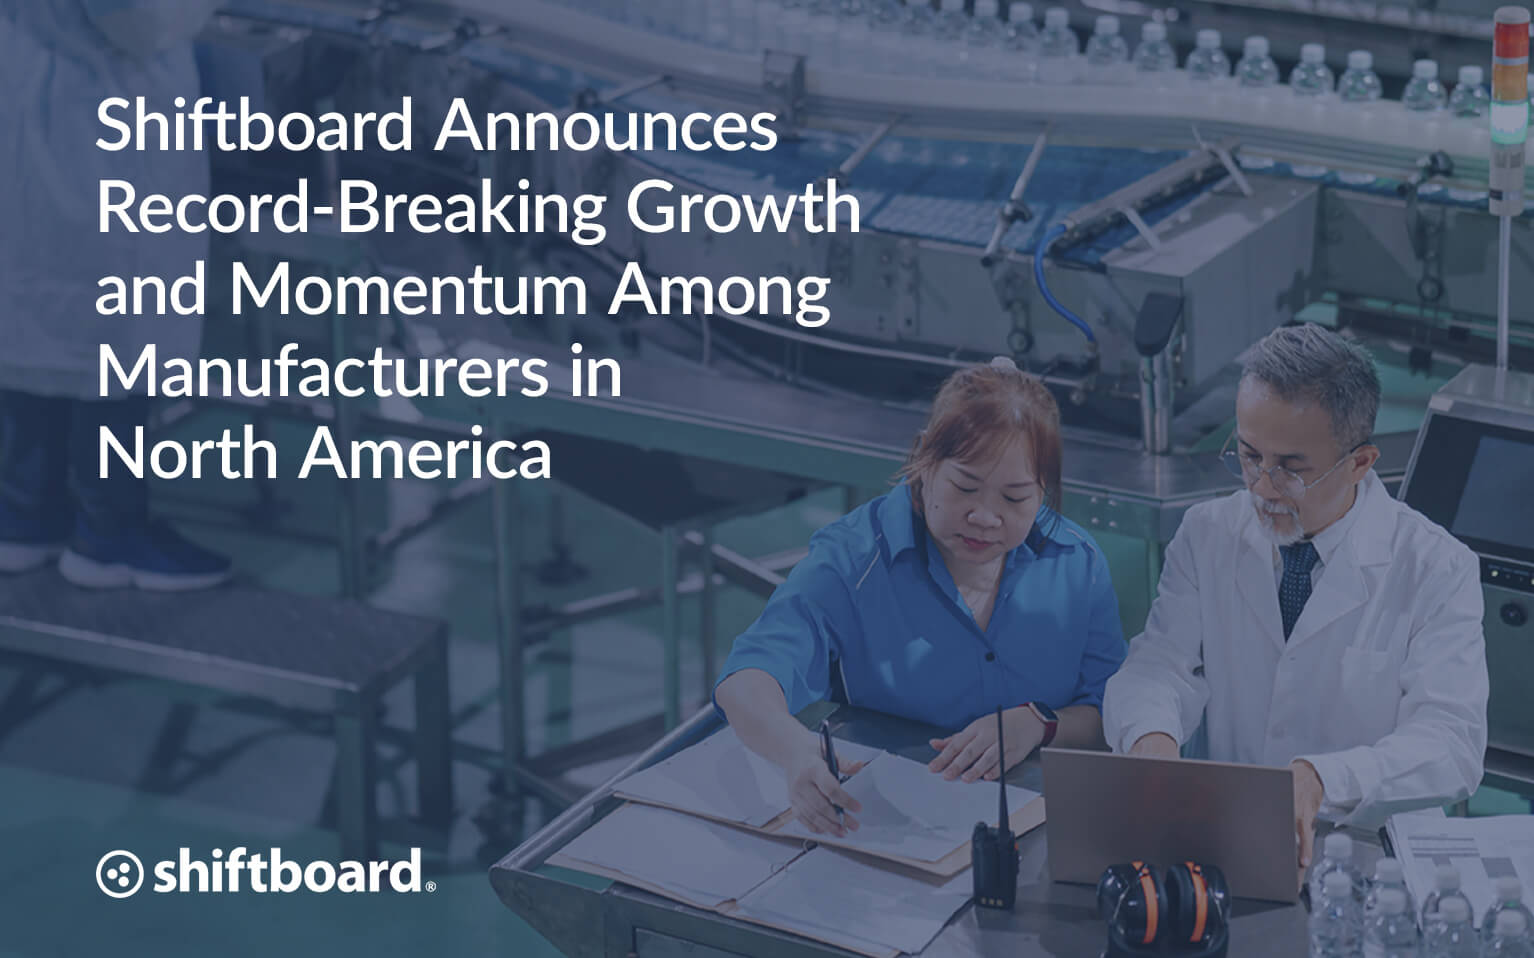 Shiftboard Announces Record-Breaking Growth and Momentum Among Manufacturers in North America